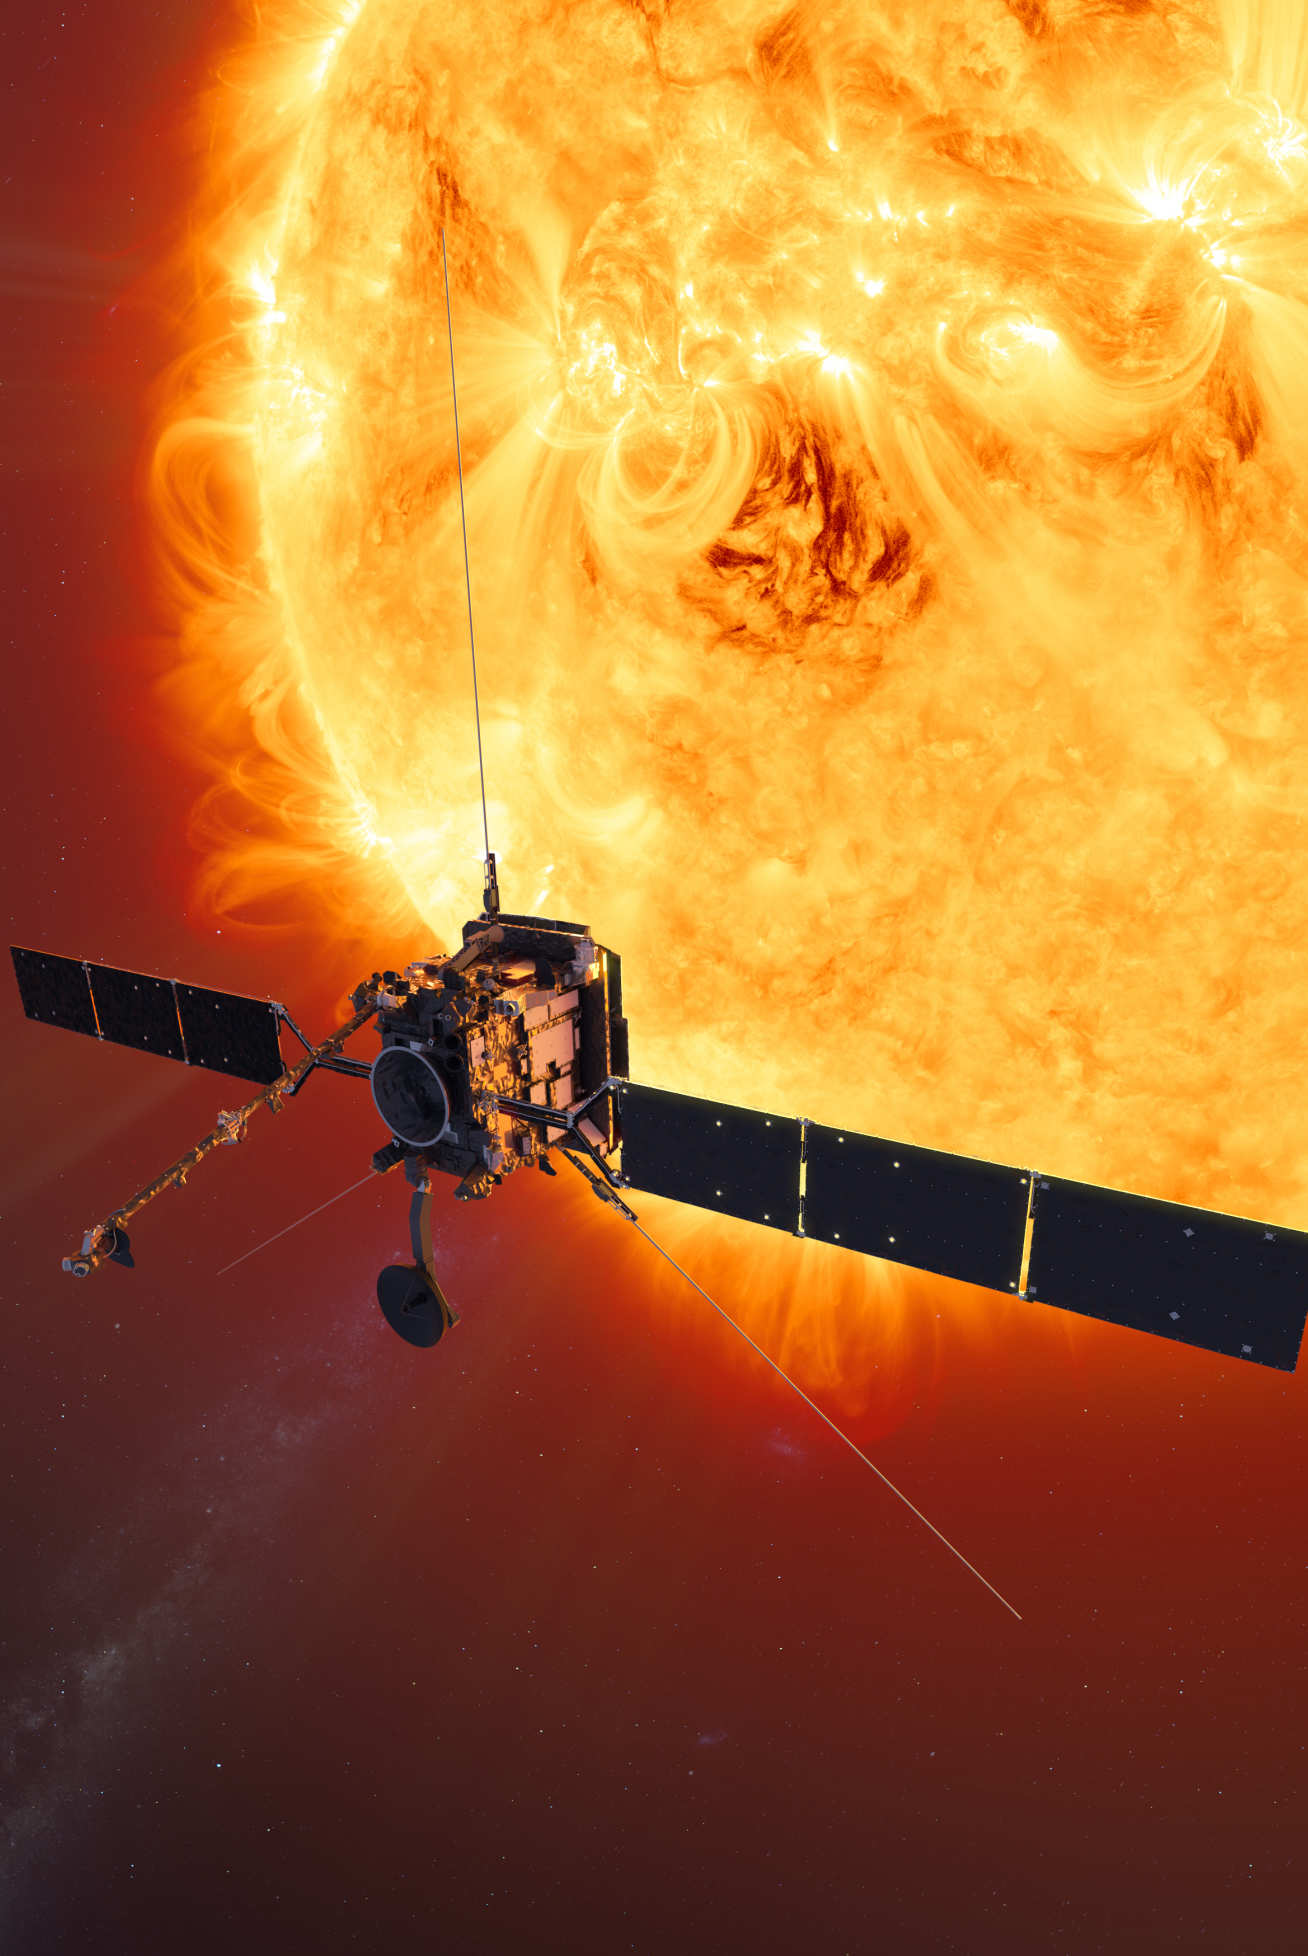 Spacecraft in front of the sun